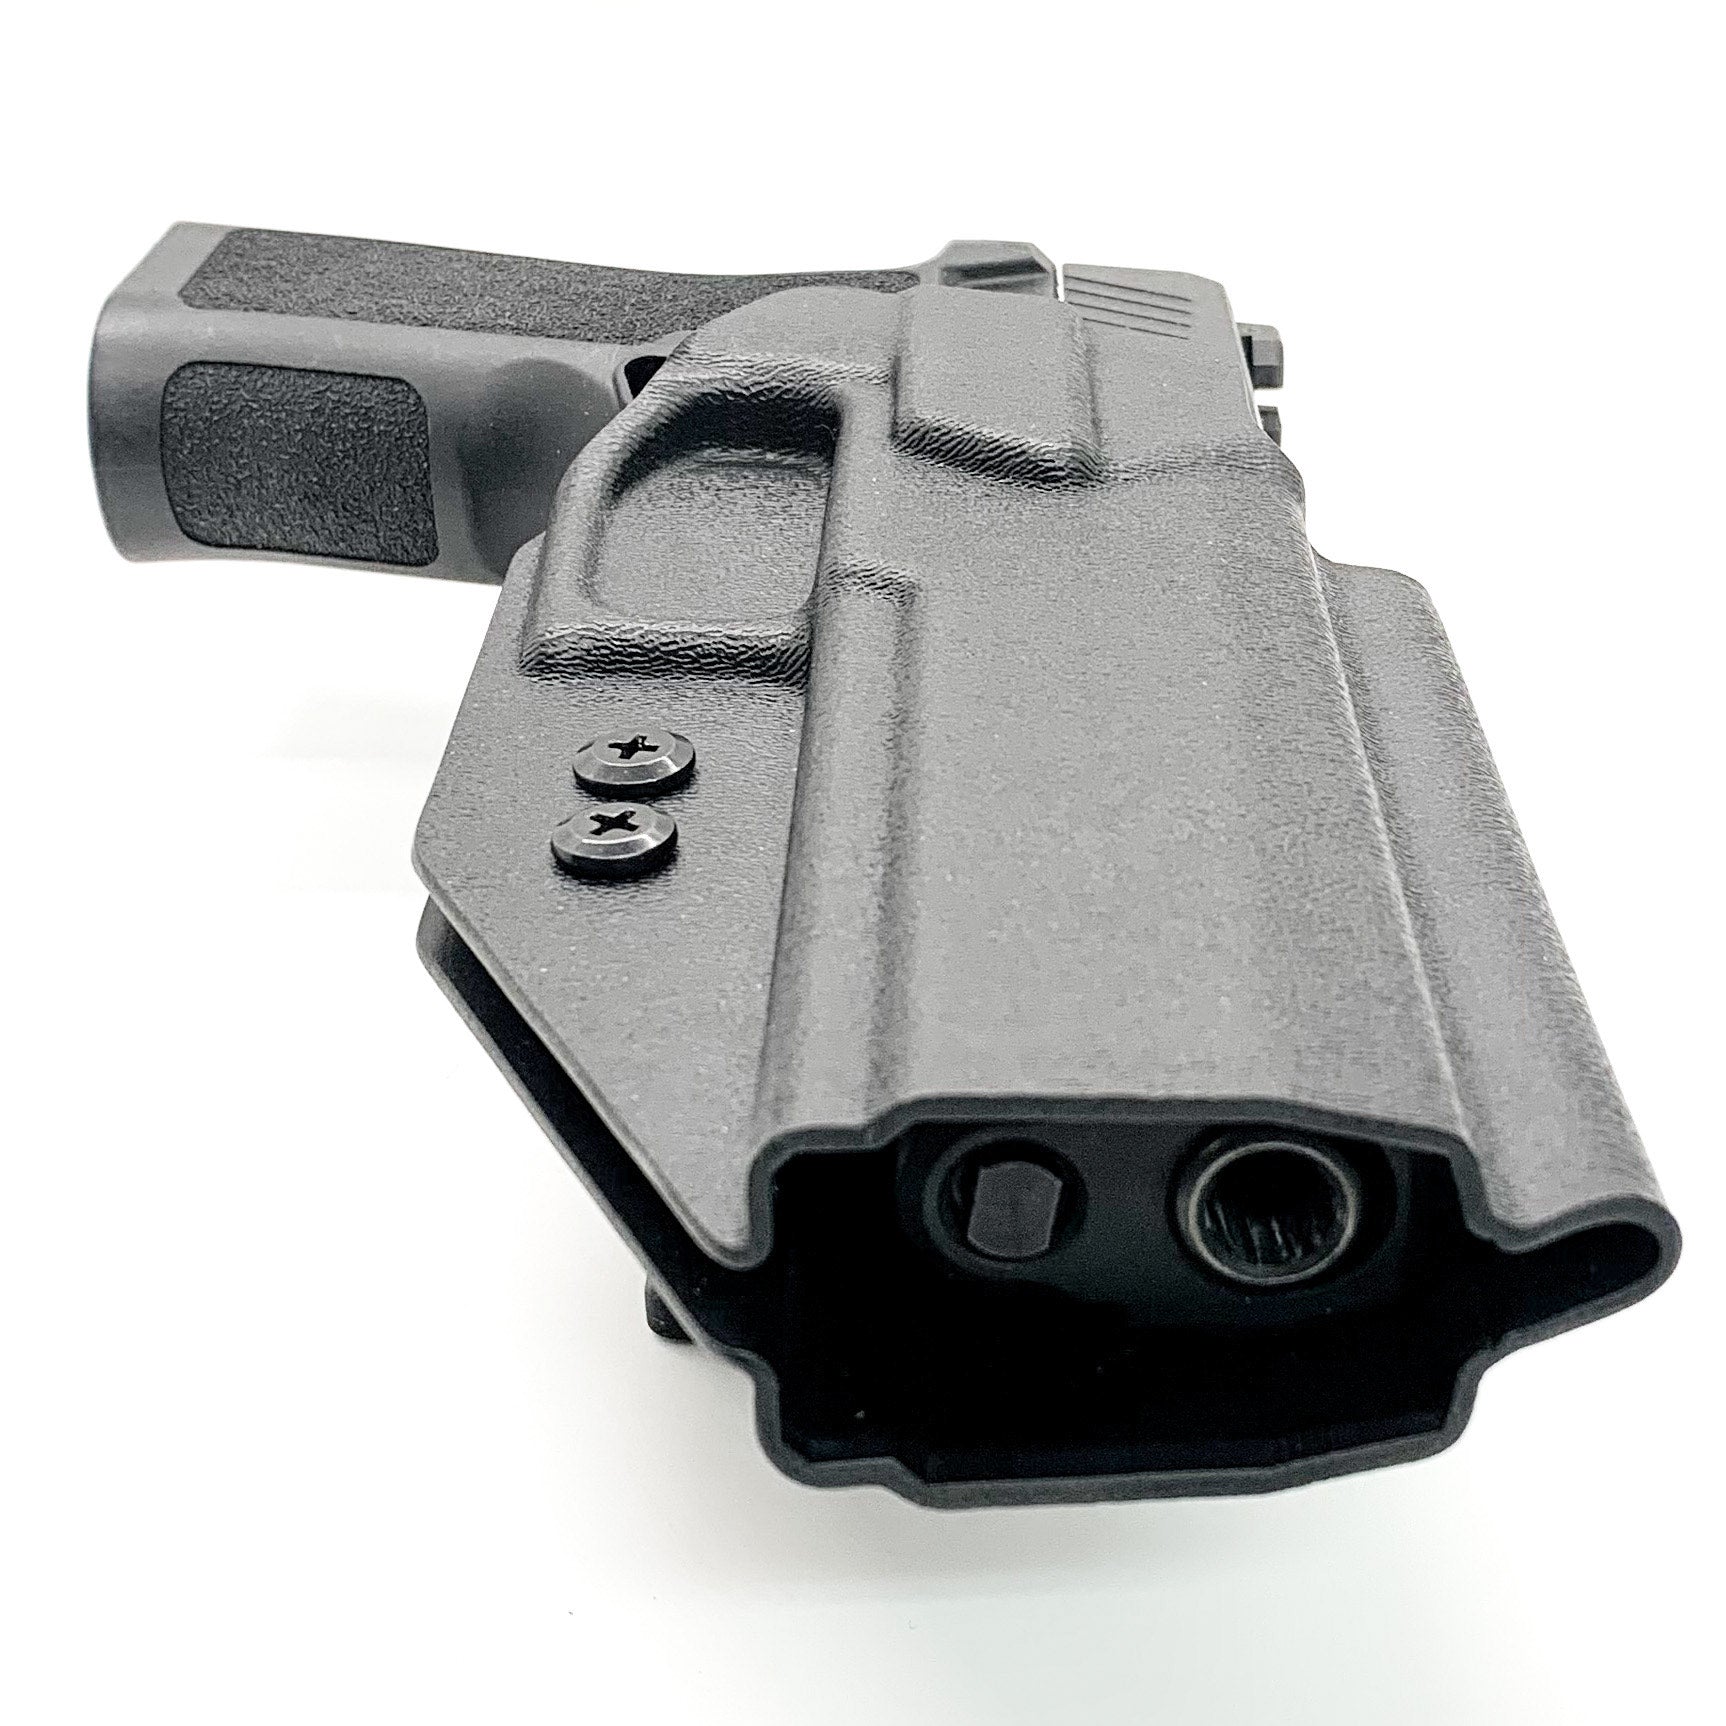 Outside waistband holster designed to fit all Sig P320 pistols with GoGuns USA Gas Pedal installed. Holster will fit the Compact, Carry, M17, M18 and X5 line of P320 pistols Profile cut to work with red dot sights, including the Trijicon SRO Open Muzzle design Retention is adjustable assembled with pride in the USA 